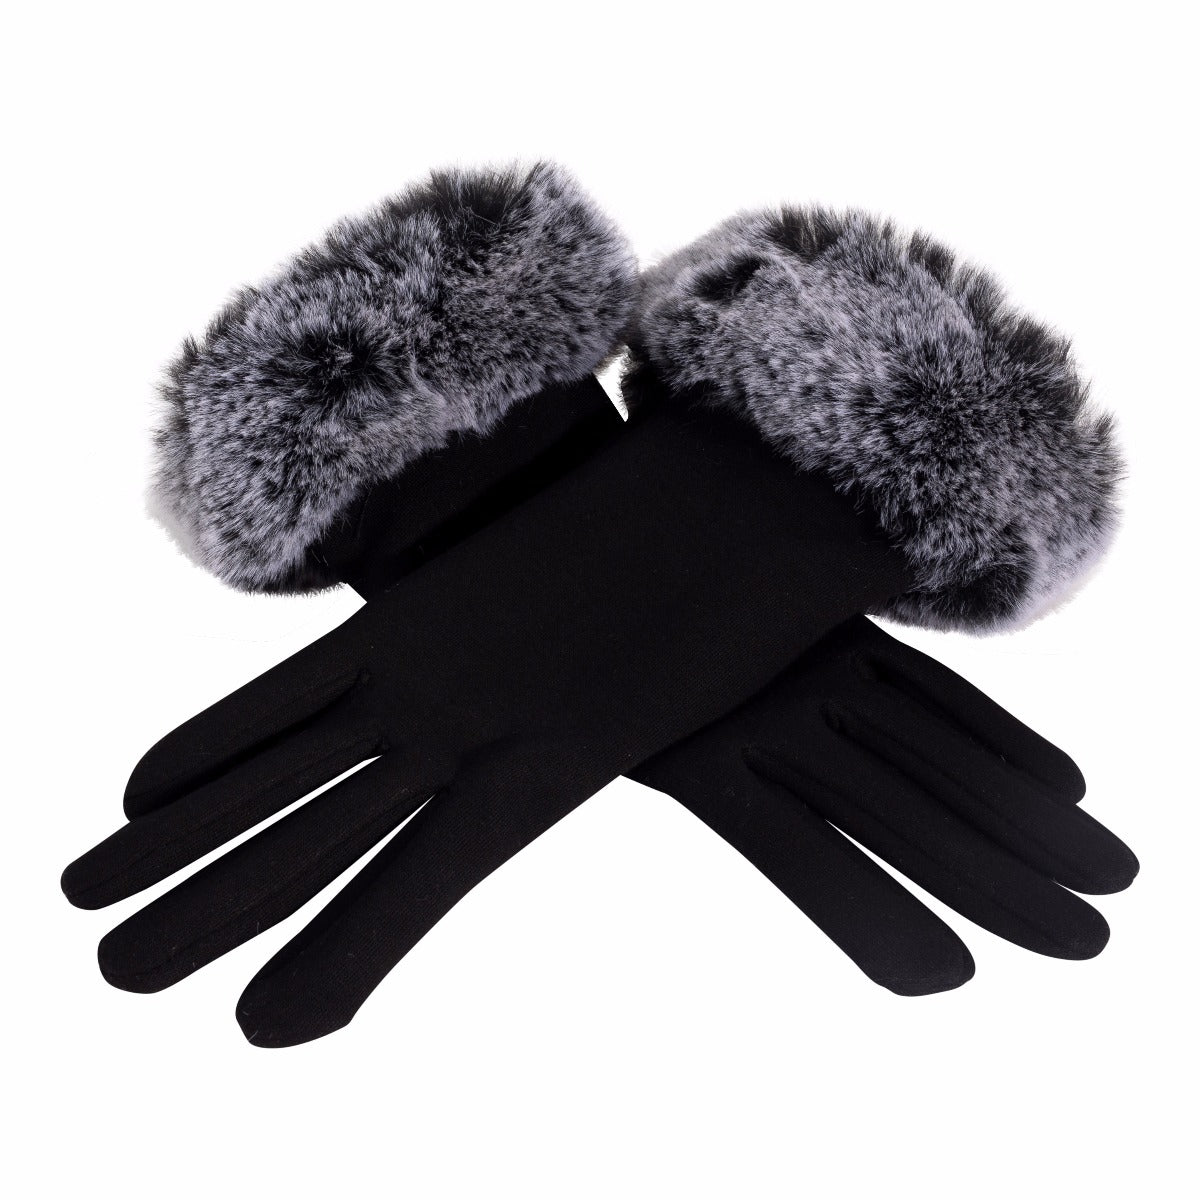 Black tactile gloves with grey faux fur